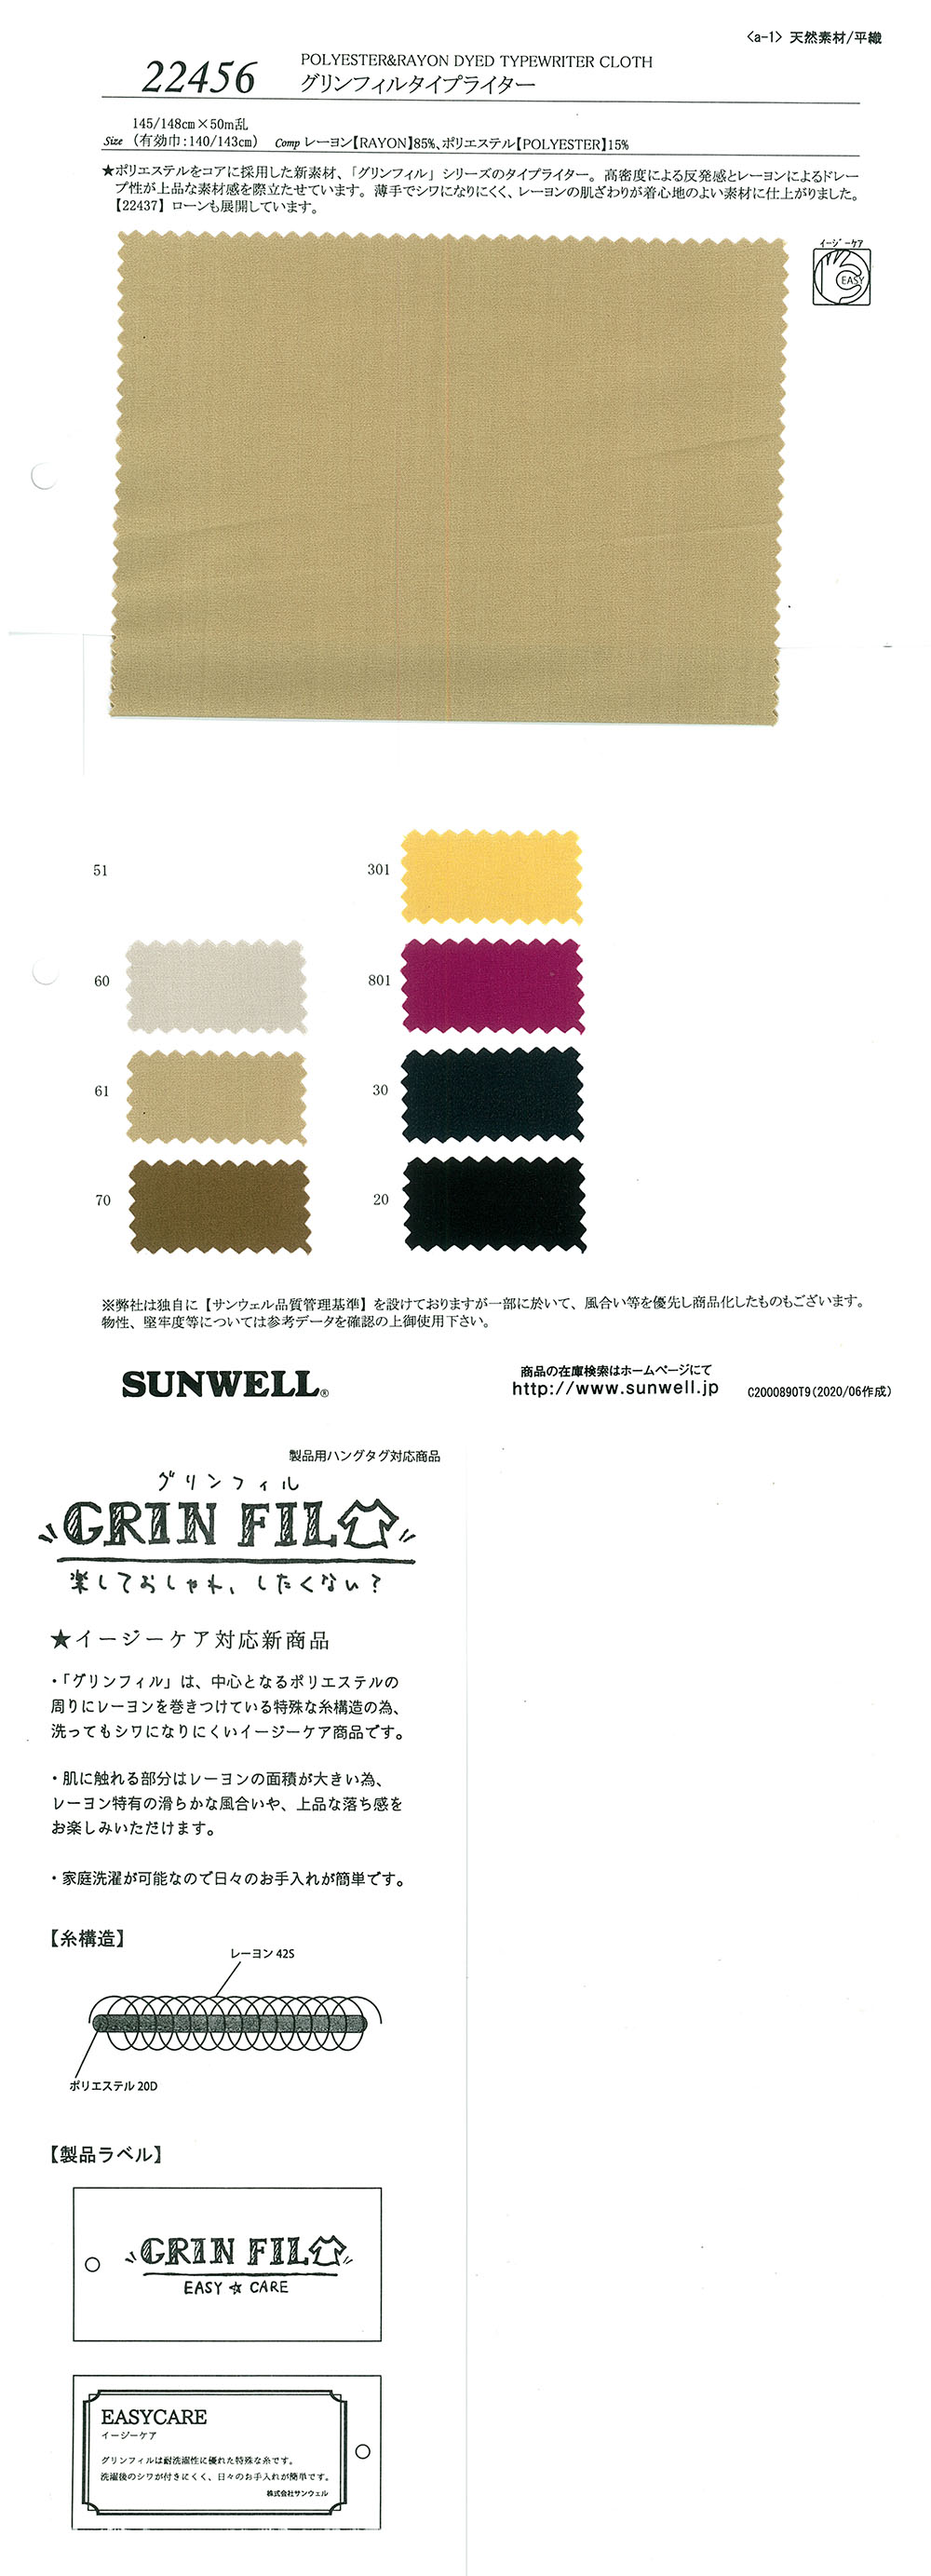 22456 GrinFil Typewritter Cloth[Textile / Fabric] SUNWELL